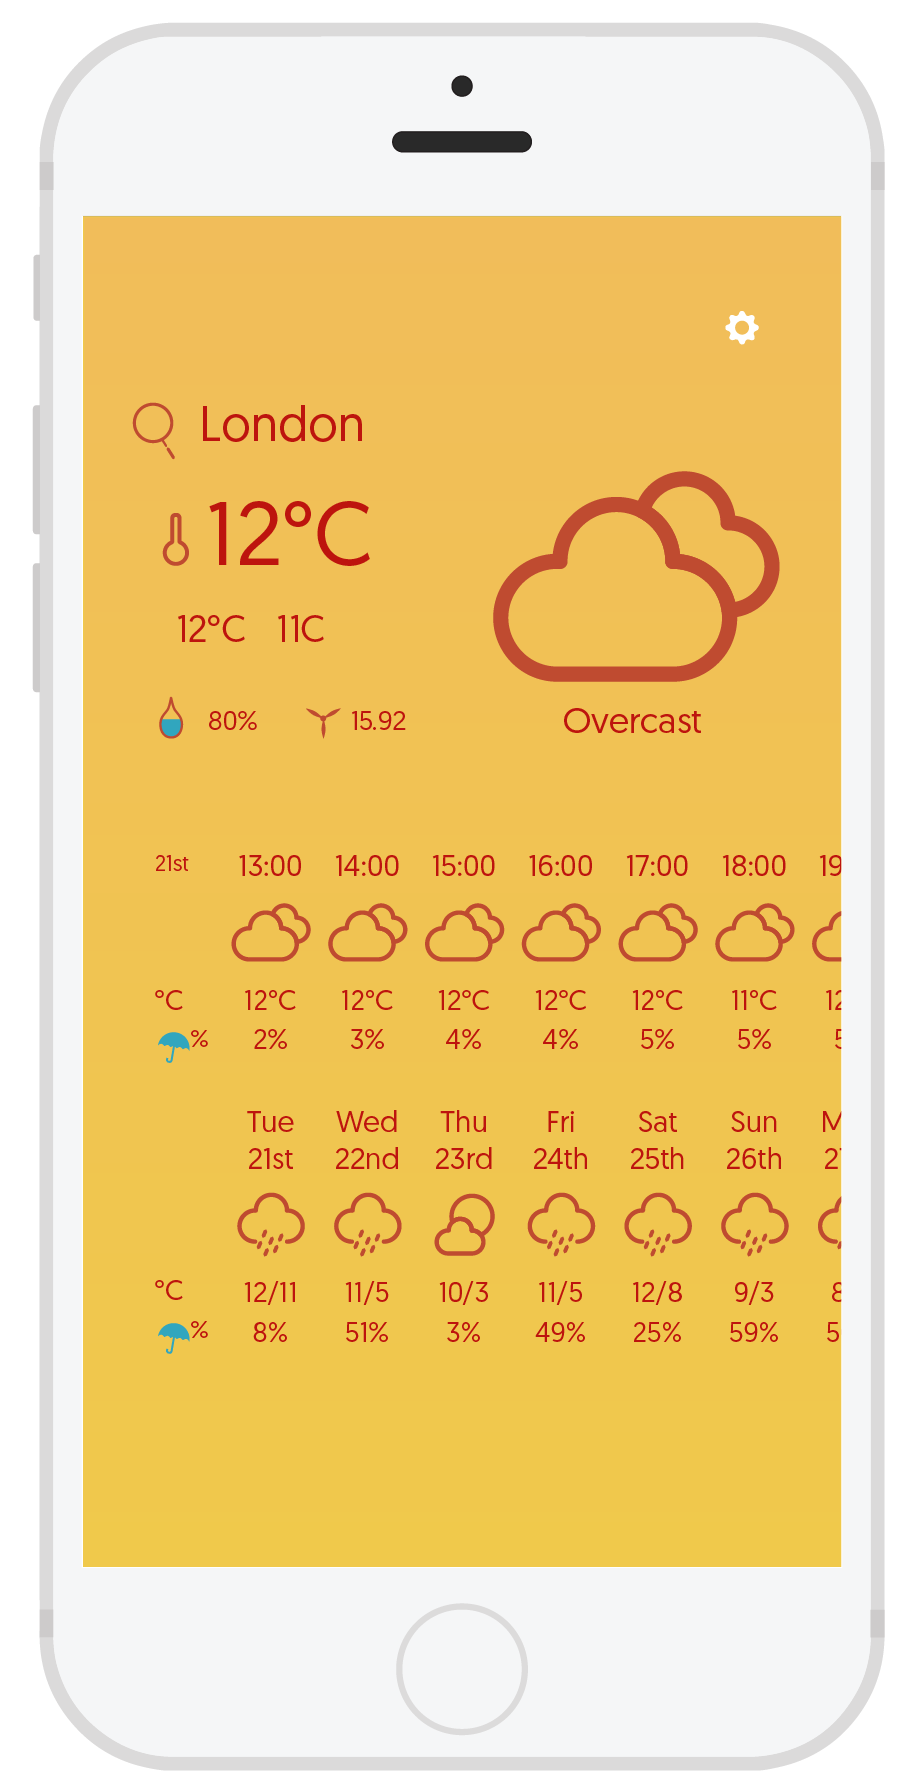 Clean and simple - Easy to read weather reports